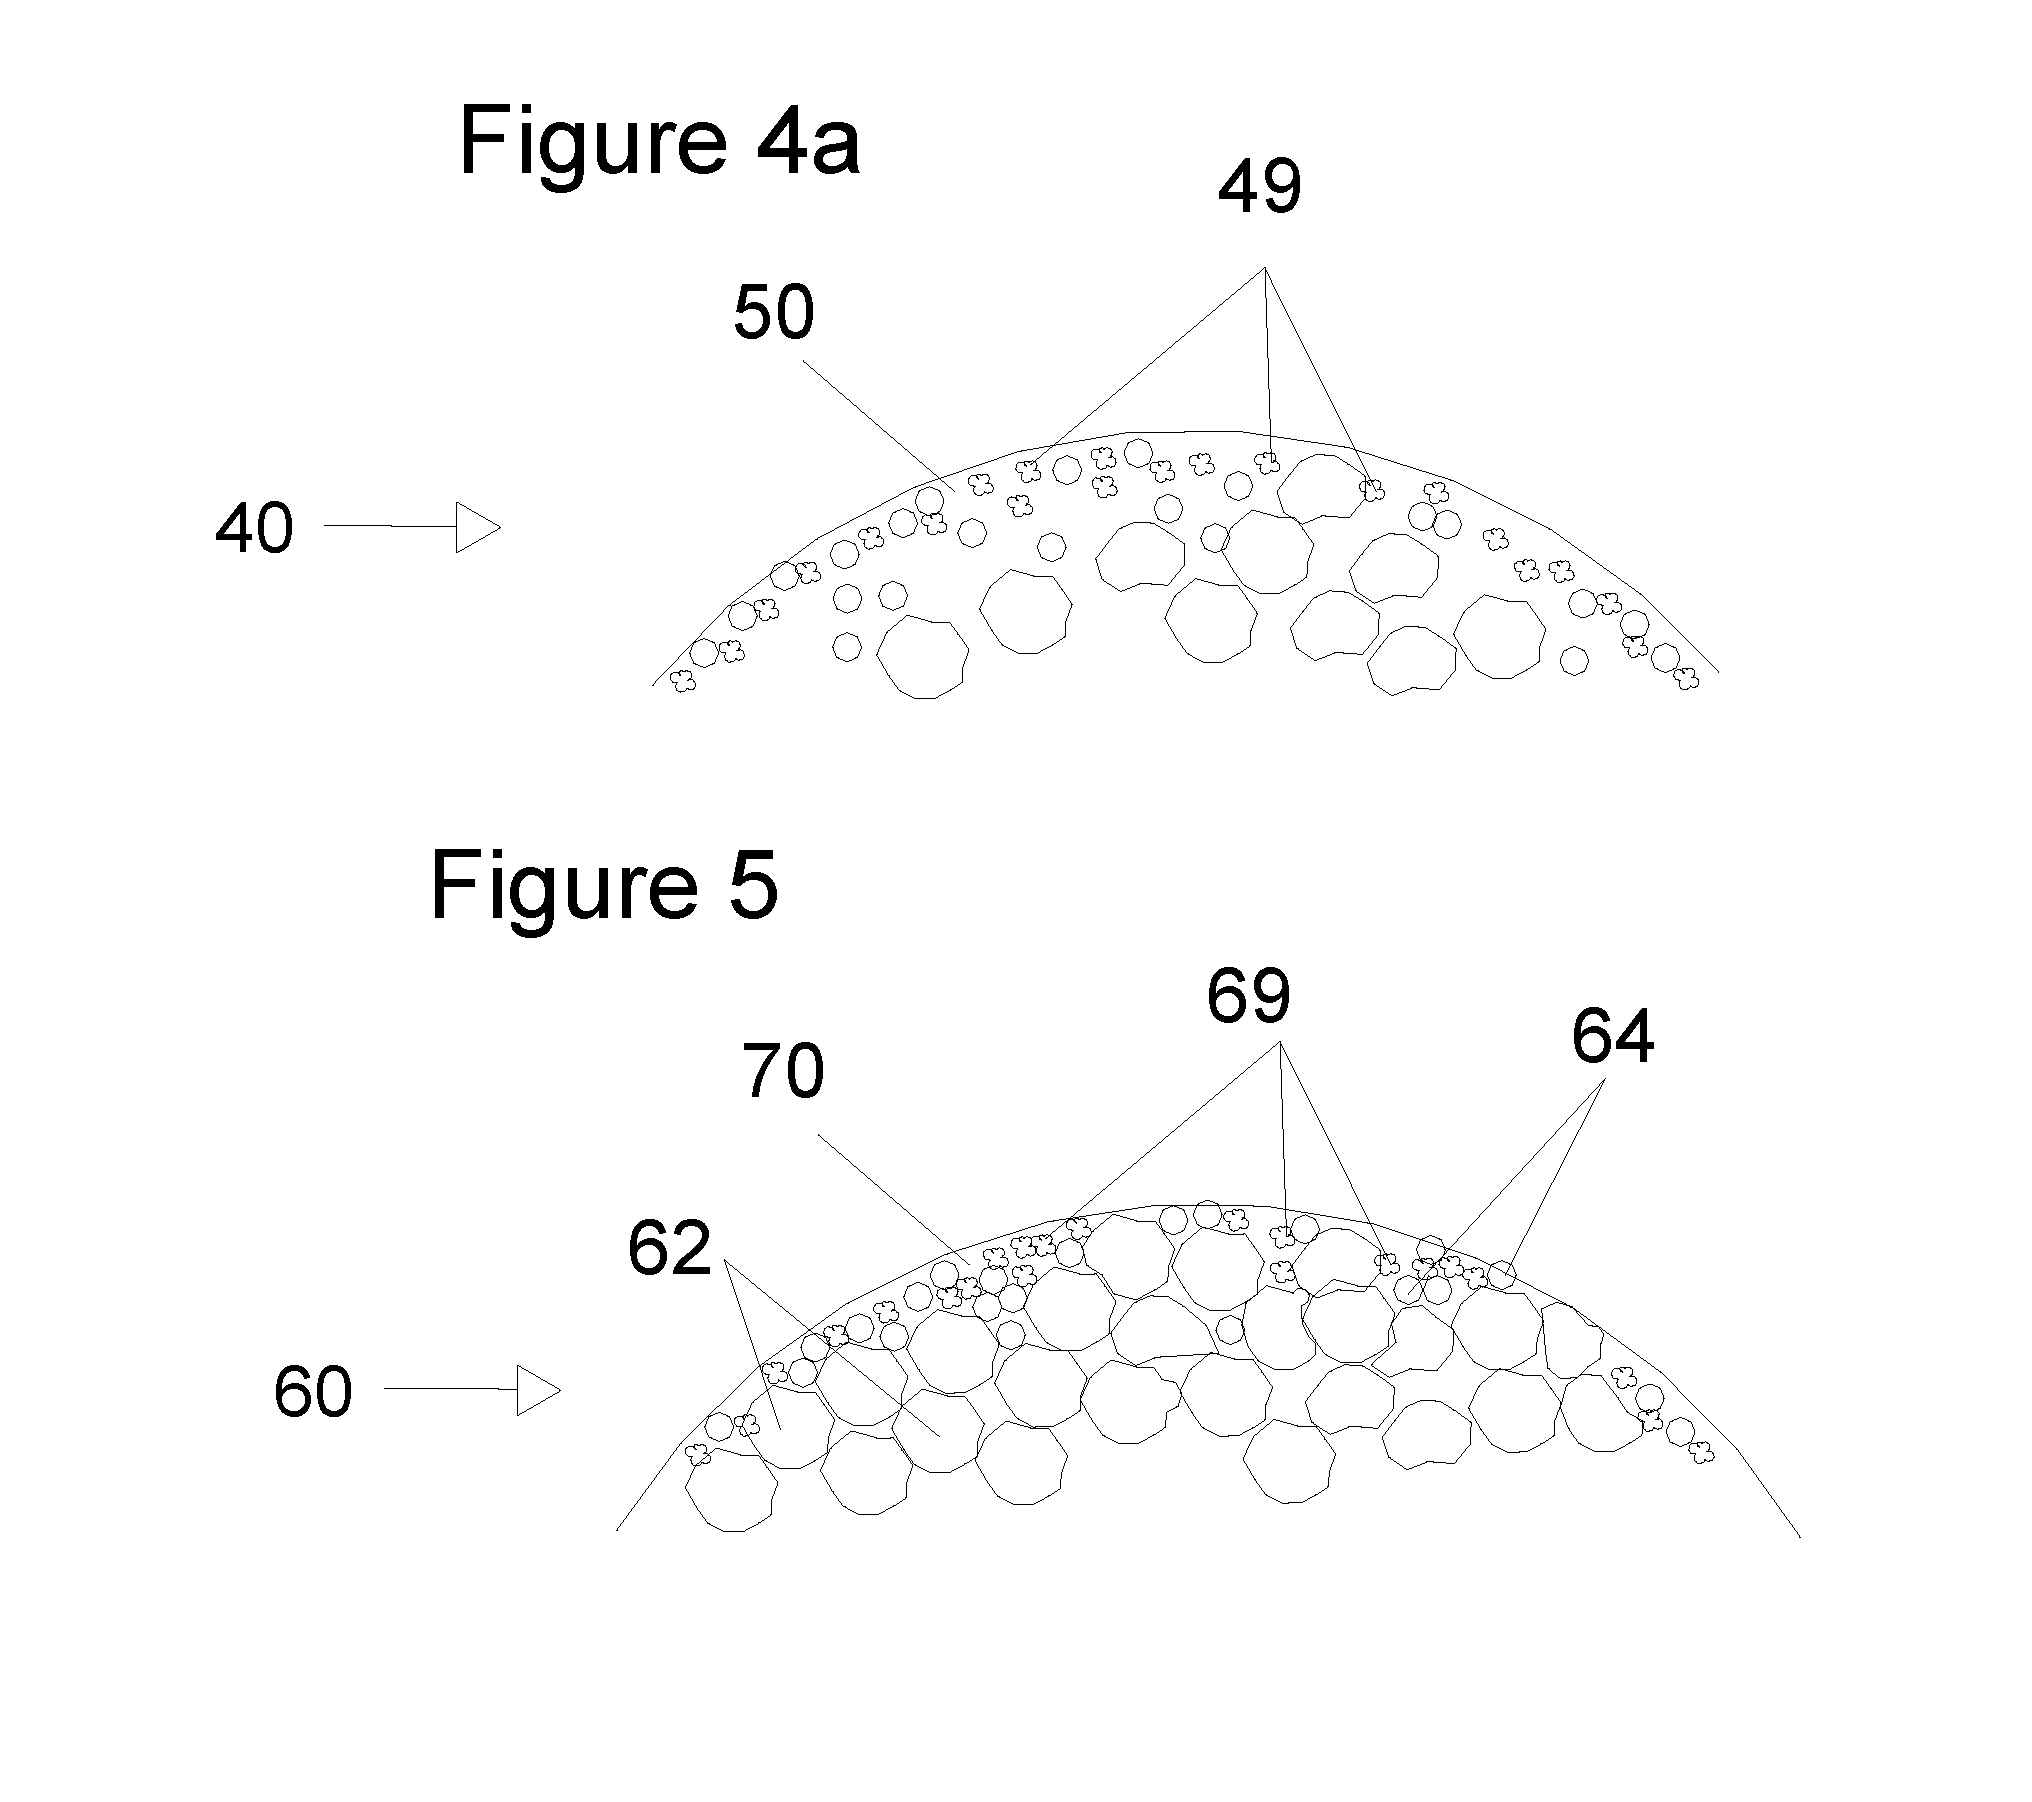 Roofing granules with high solar reflectance, roofing products with high solar reflectance, and processes for producing same